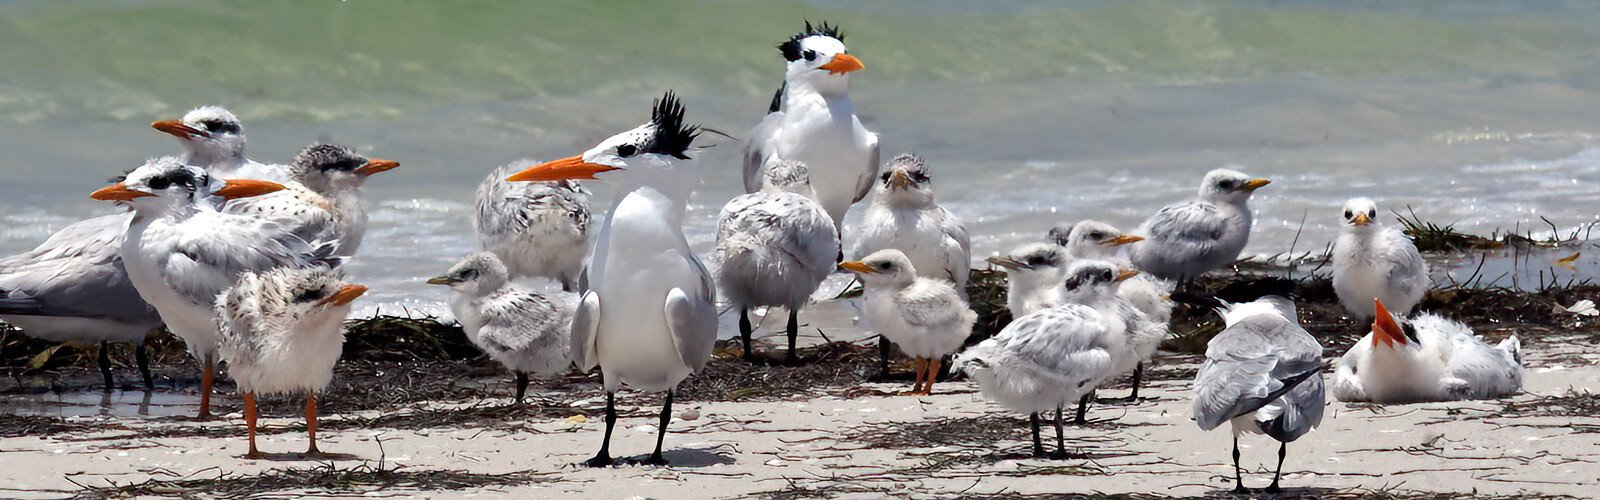 Every year, tens of thousands of royal terns, as well as sandwich terns and Caspian terns, raise their chicks by the shoreline. Our beach season is their nesting season, making it vital to share the shore.